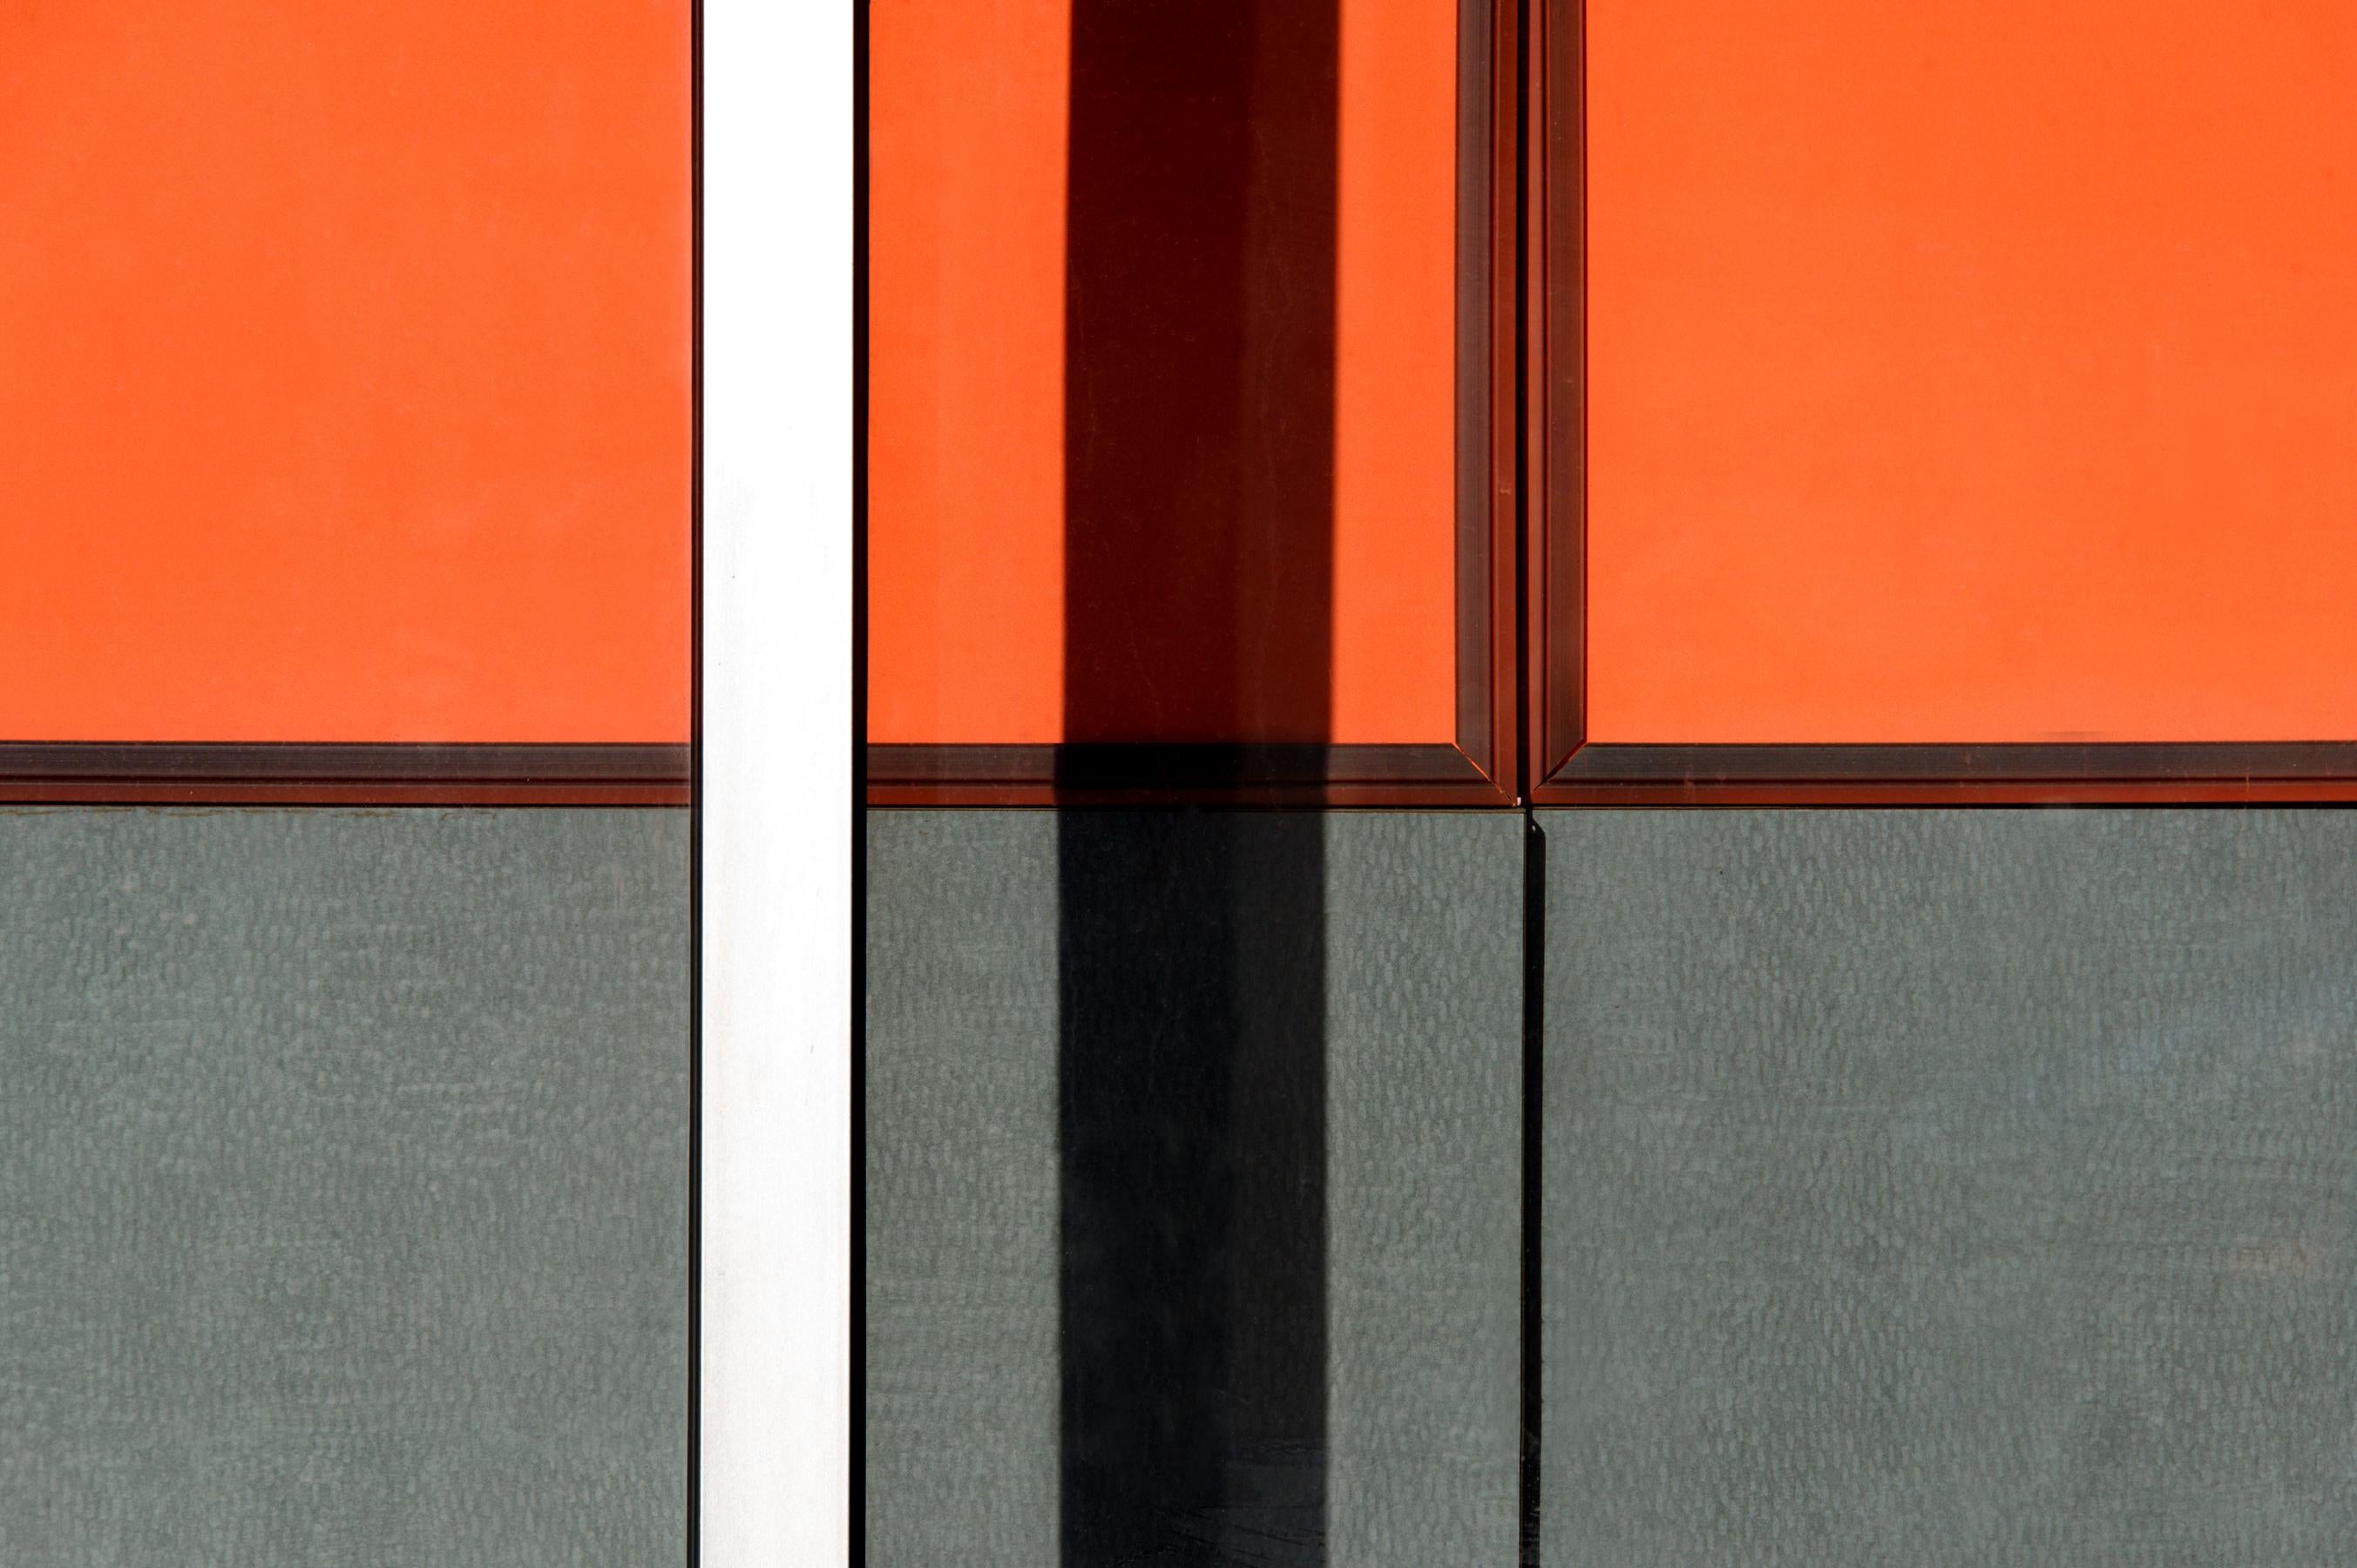 Bob Krasner Color Photograph - "Brooklyn Boogie Woogie", photograph, city, architecture, geometry, line pattern